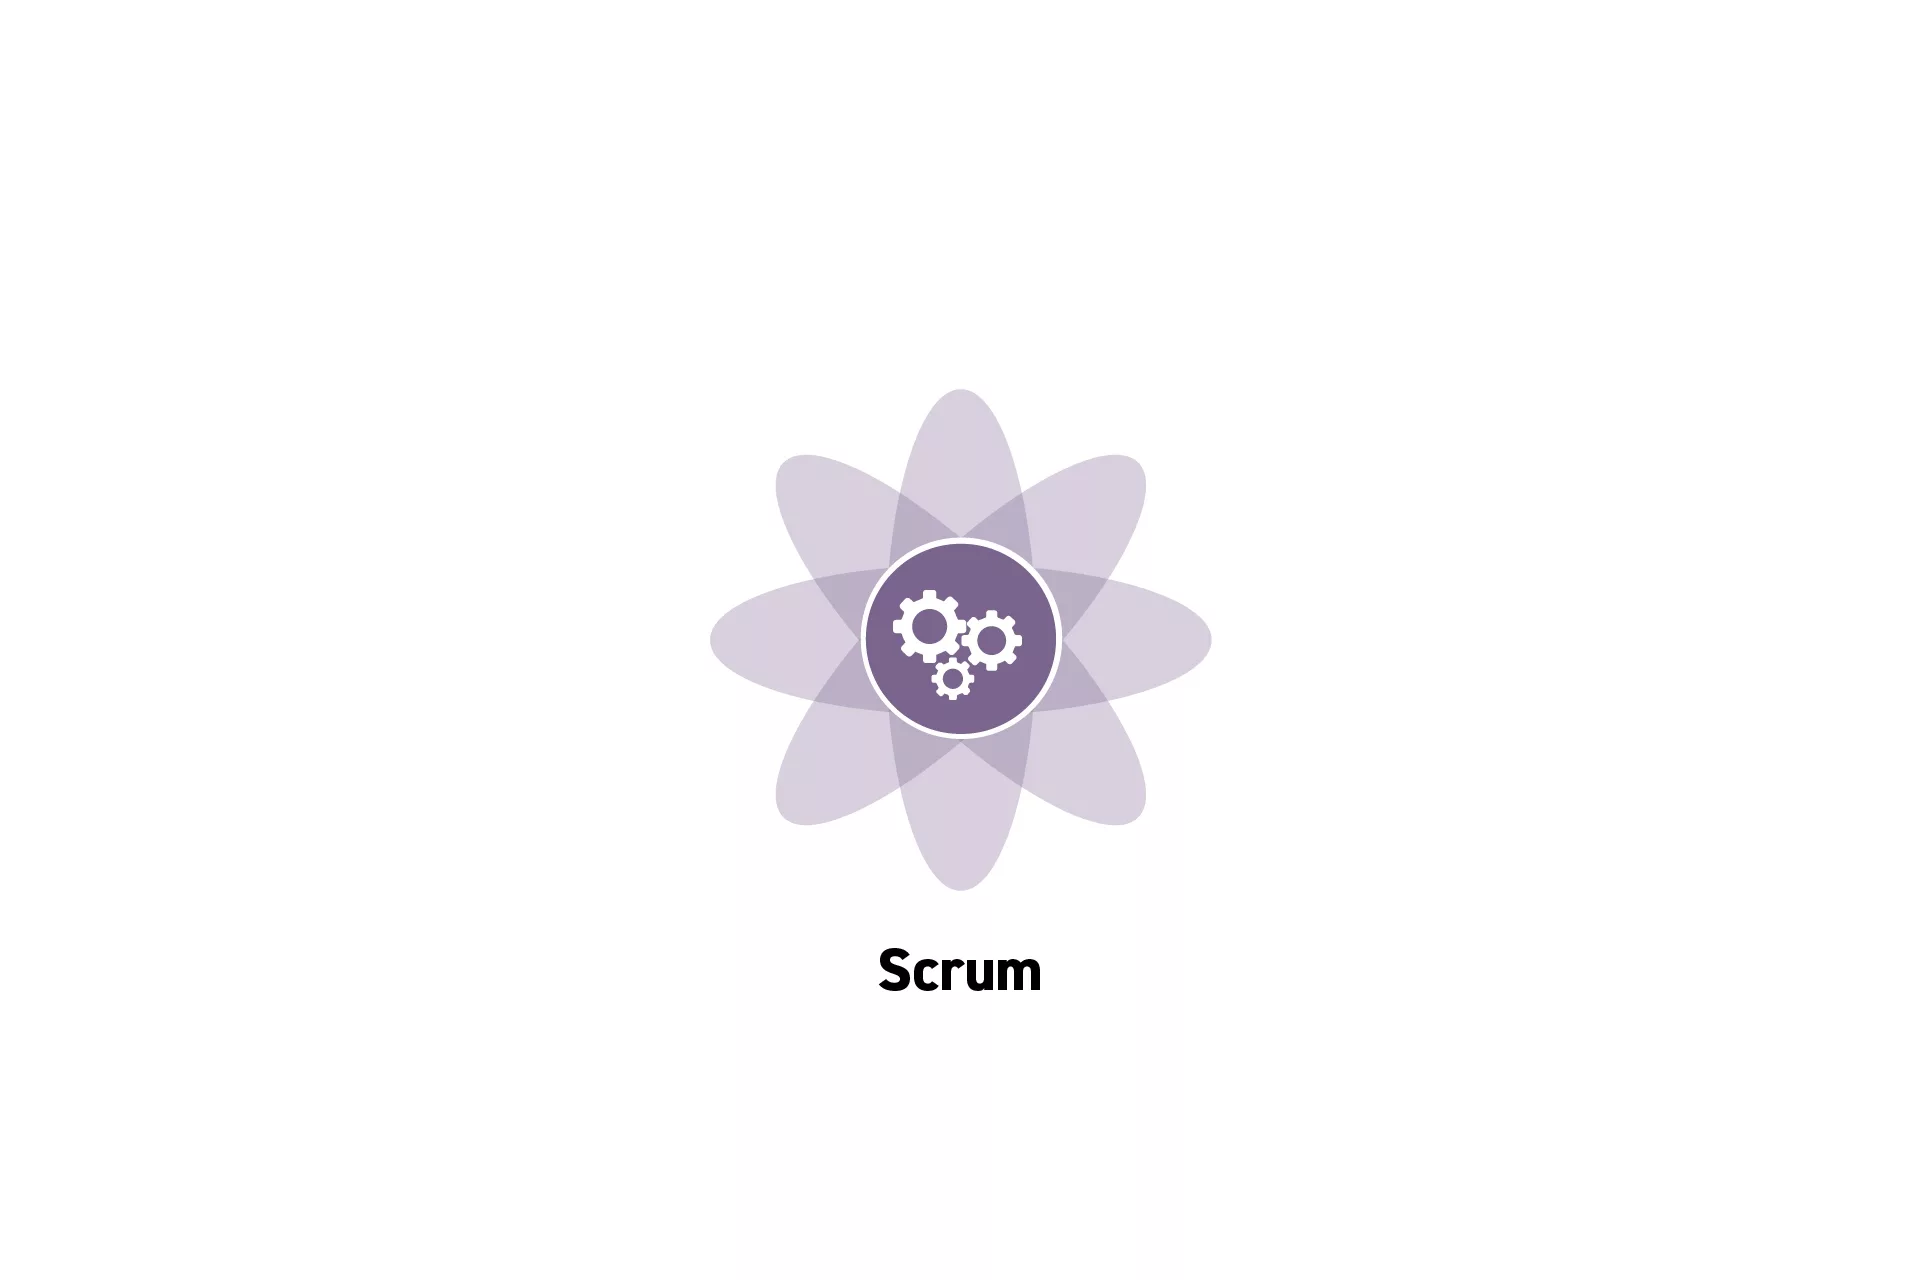 A flower that represents Project Management with the text “Scrum” beneath it.